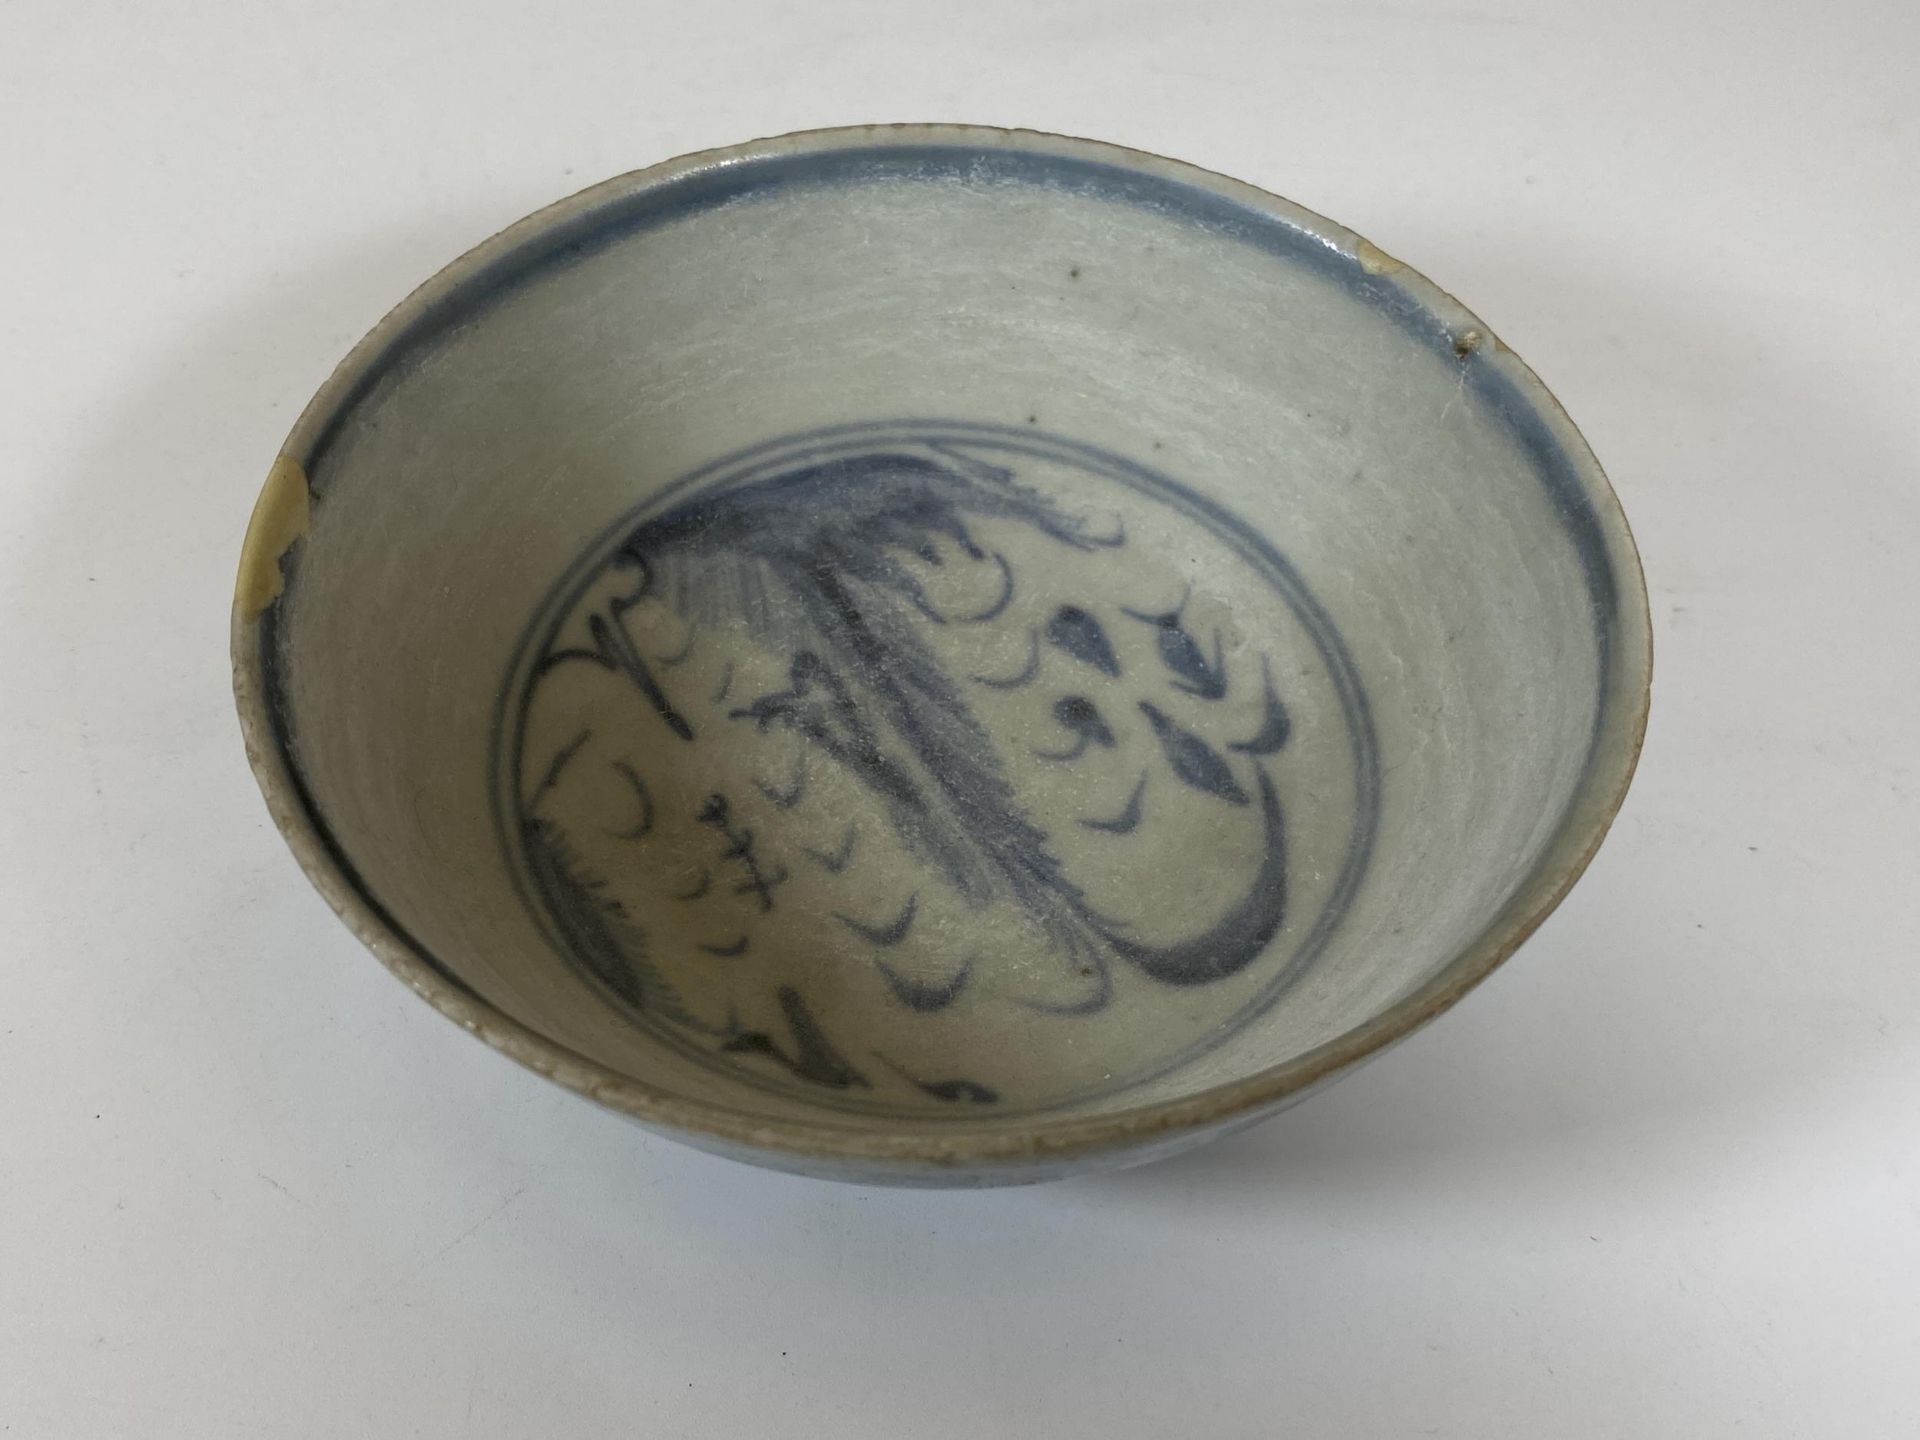 A BELIEVED MING DYNASTY CHINESE BLUE AND WHITE PORCELAIN BOWL, SIX CHARACTER MARK TO BASE DIAMETER - Image 2 of 6